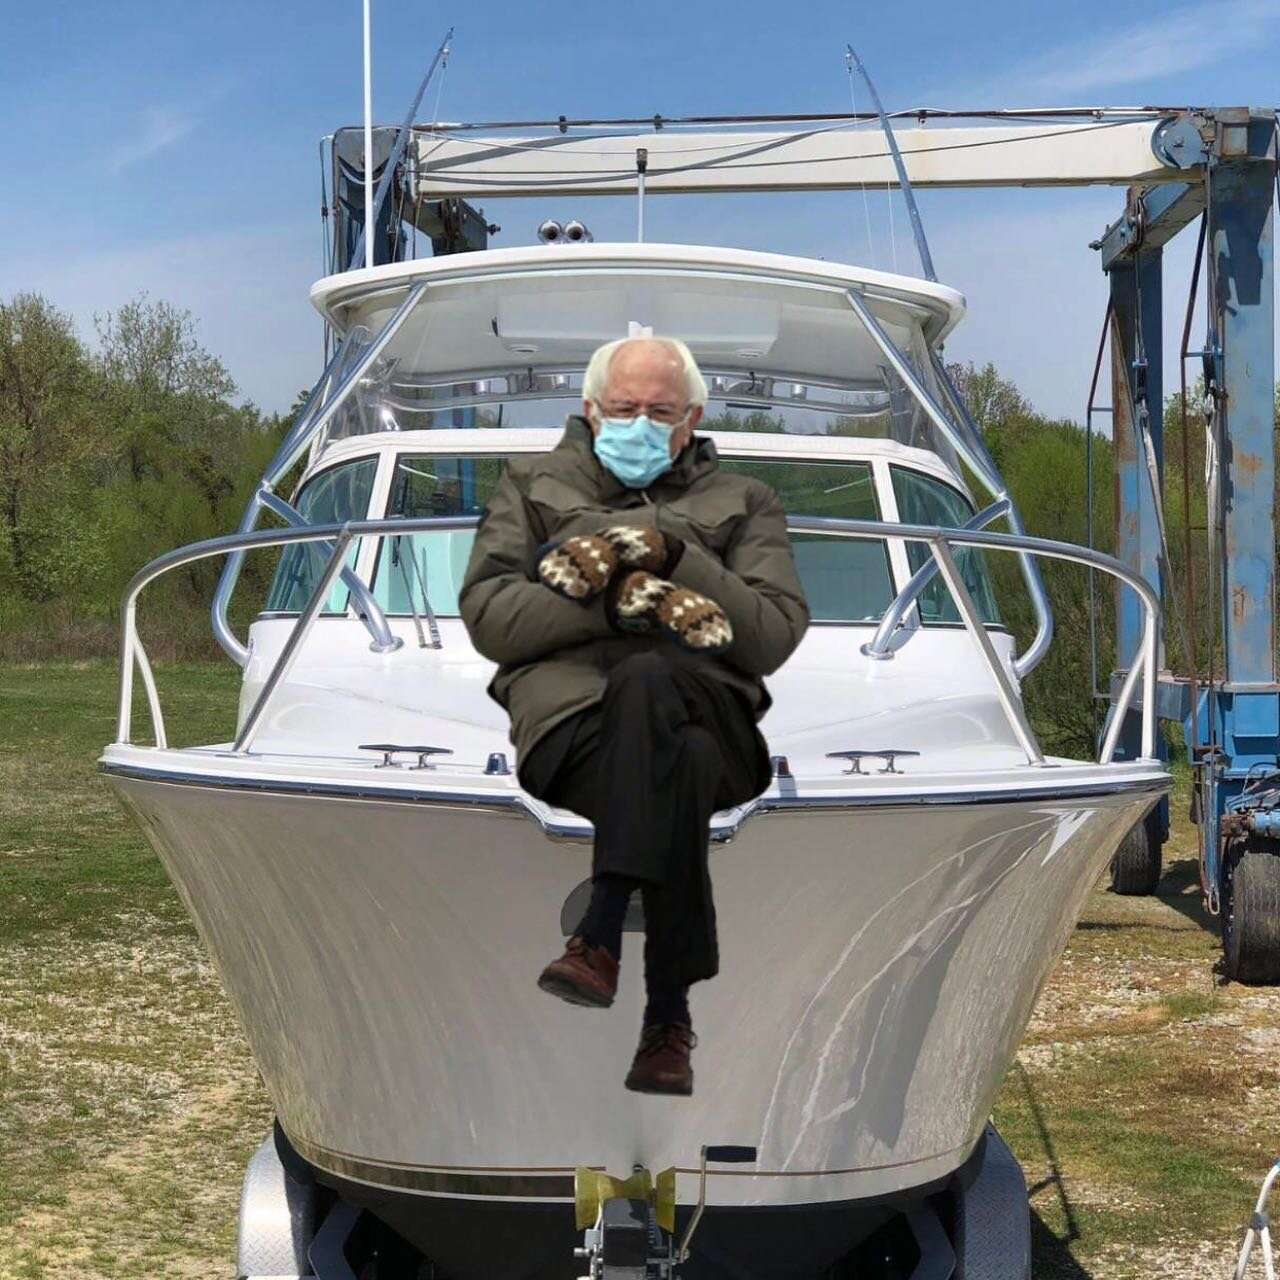 We couldn&rsquo;t resist 😂

Even ol&rsquo; Bernie knows who to call for superior quality, professional marine detailing services on the Northern Neck!

What are you waiting for? Beat the warm weather rush and call today to schedule your vessel&rsquo